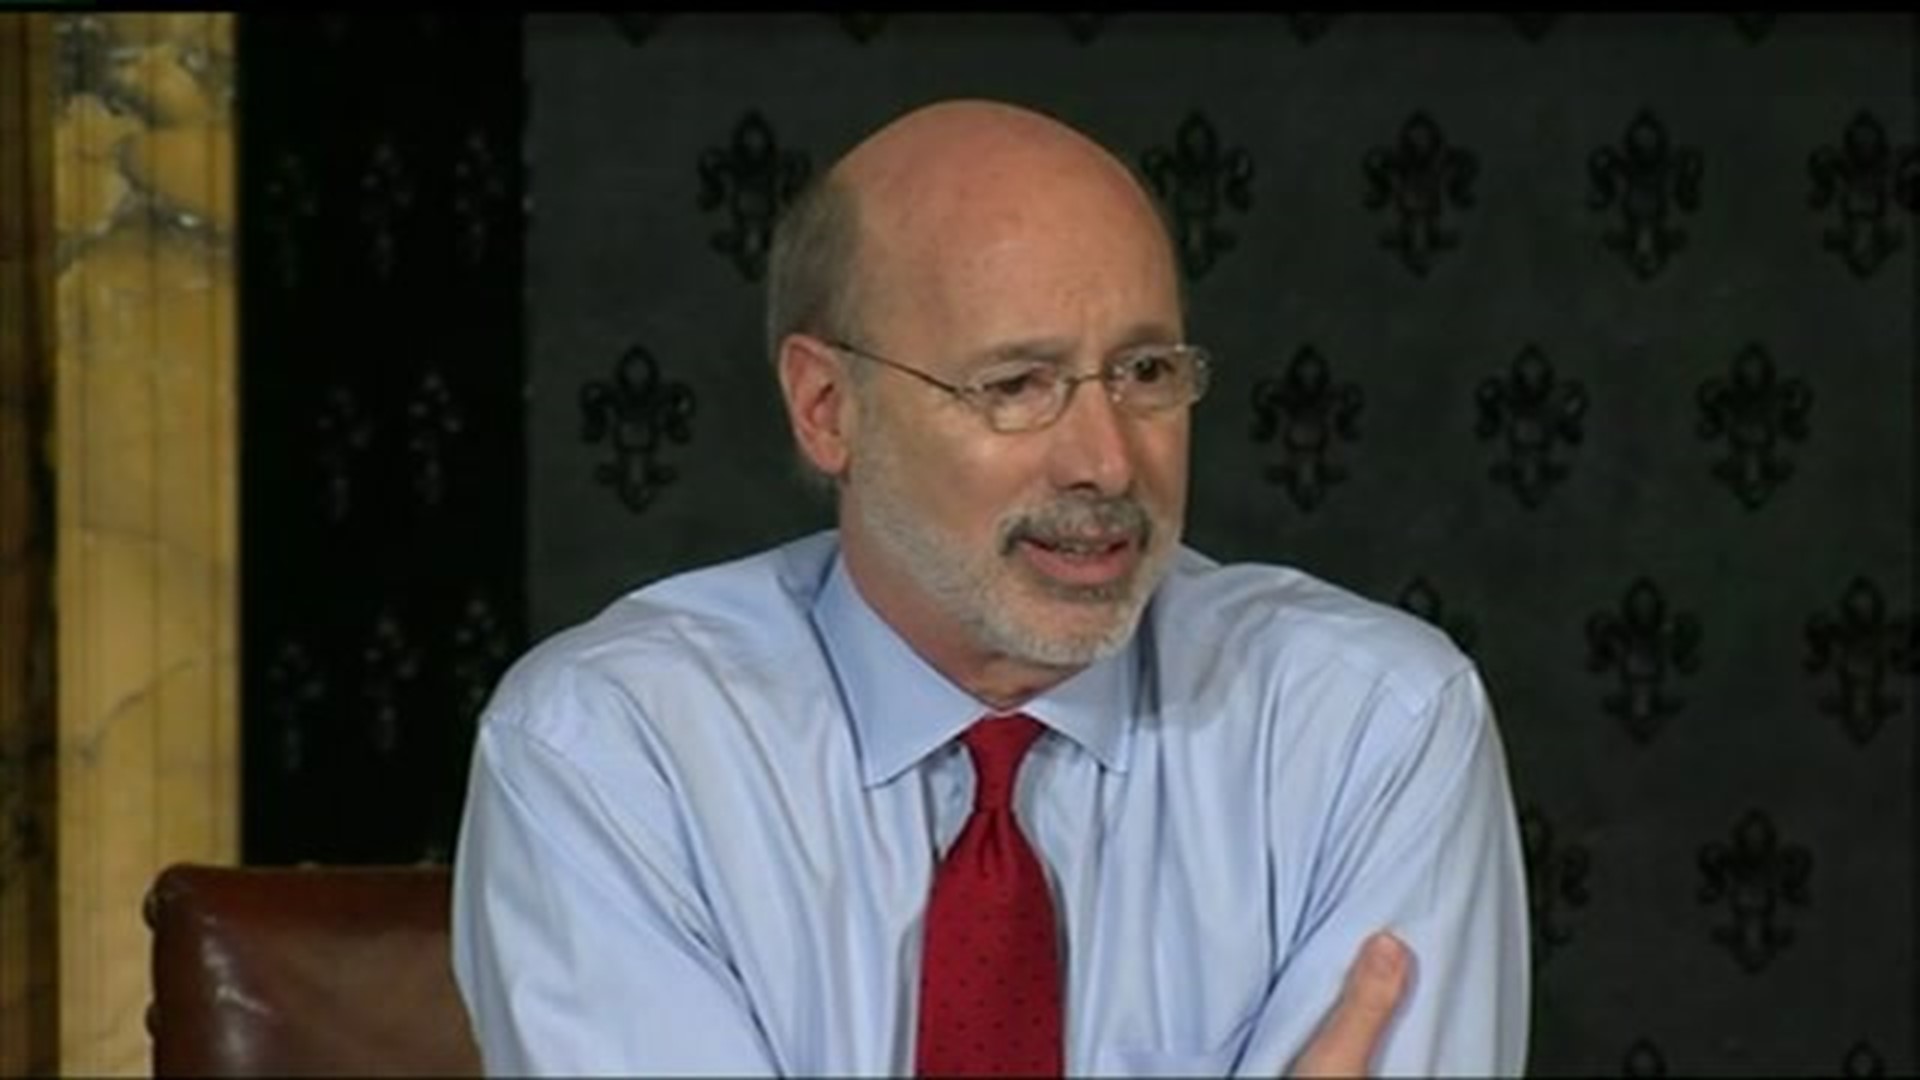 Governor Wolf to be Treated for Prostate Cancer